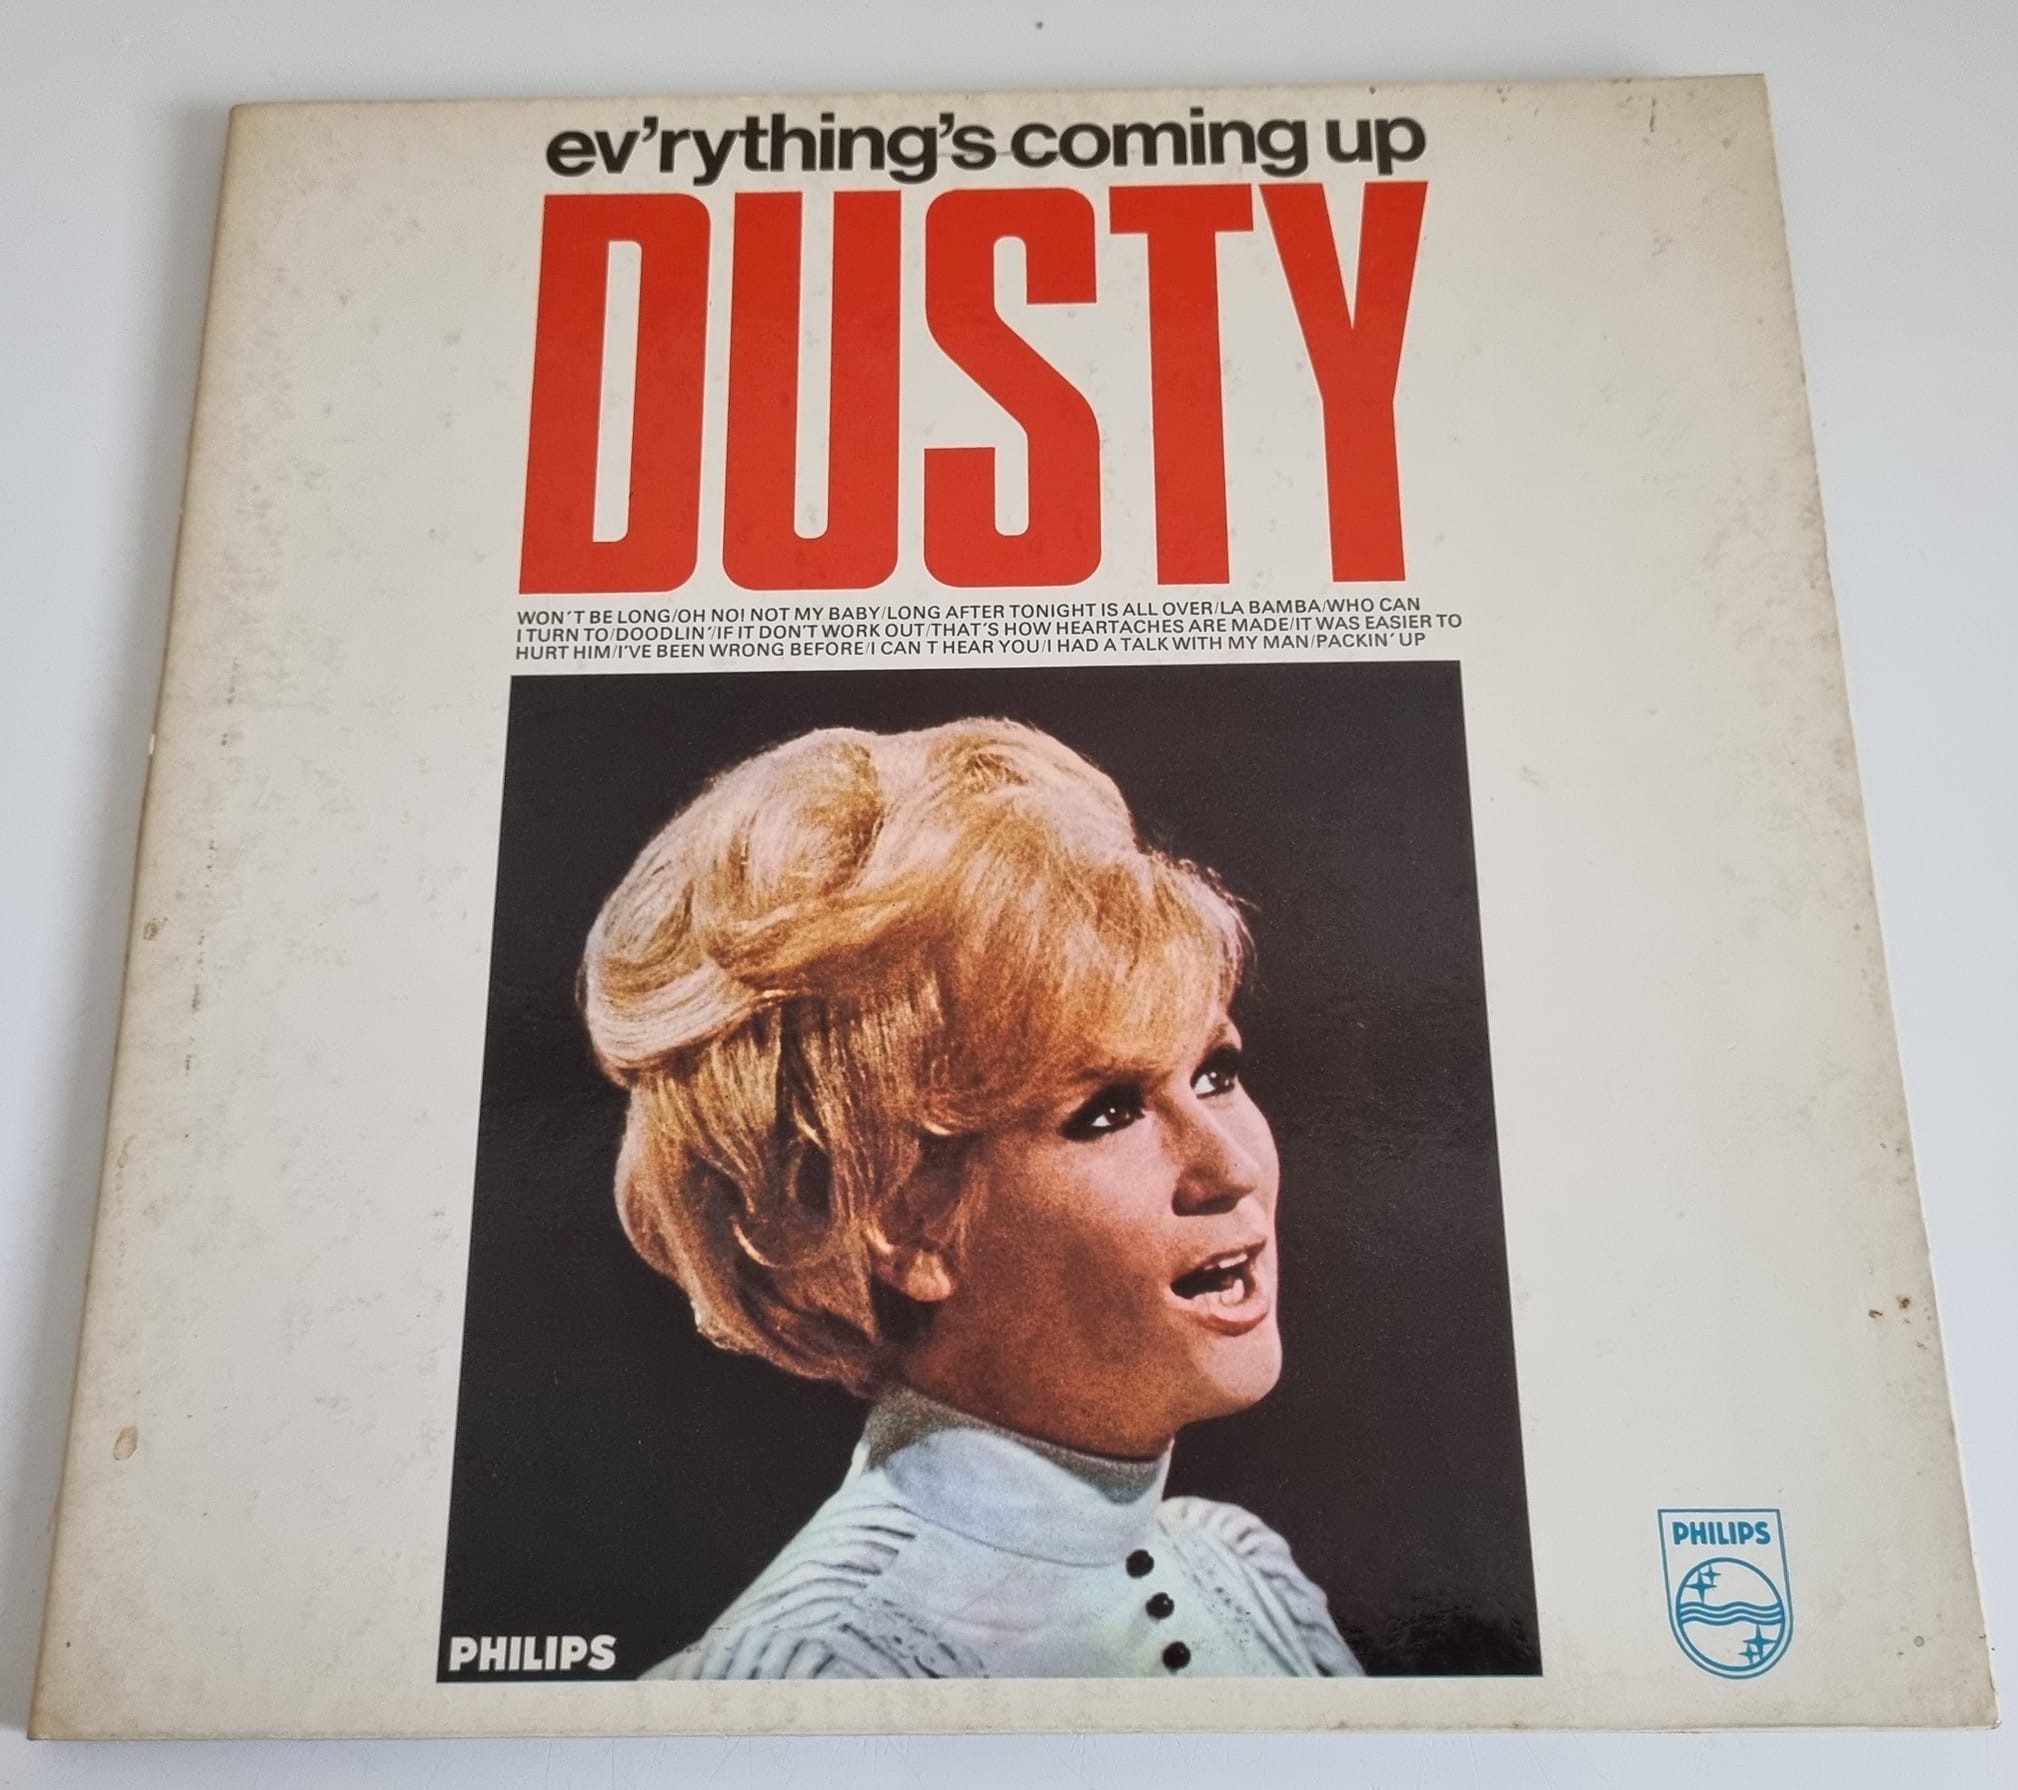 Buy this rare Dusty Springfield record by clicking here